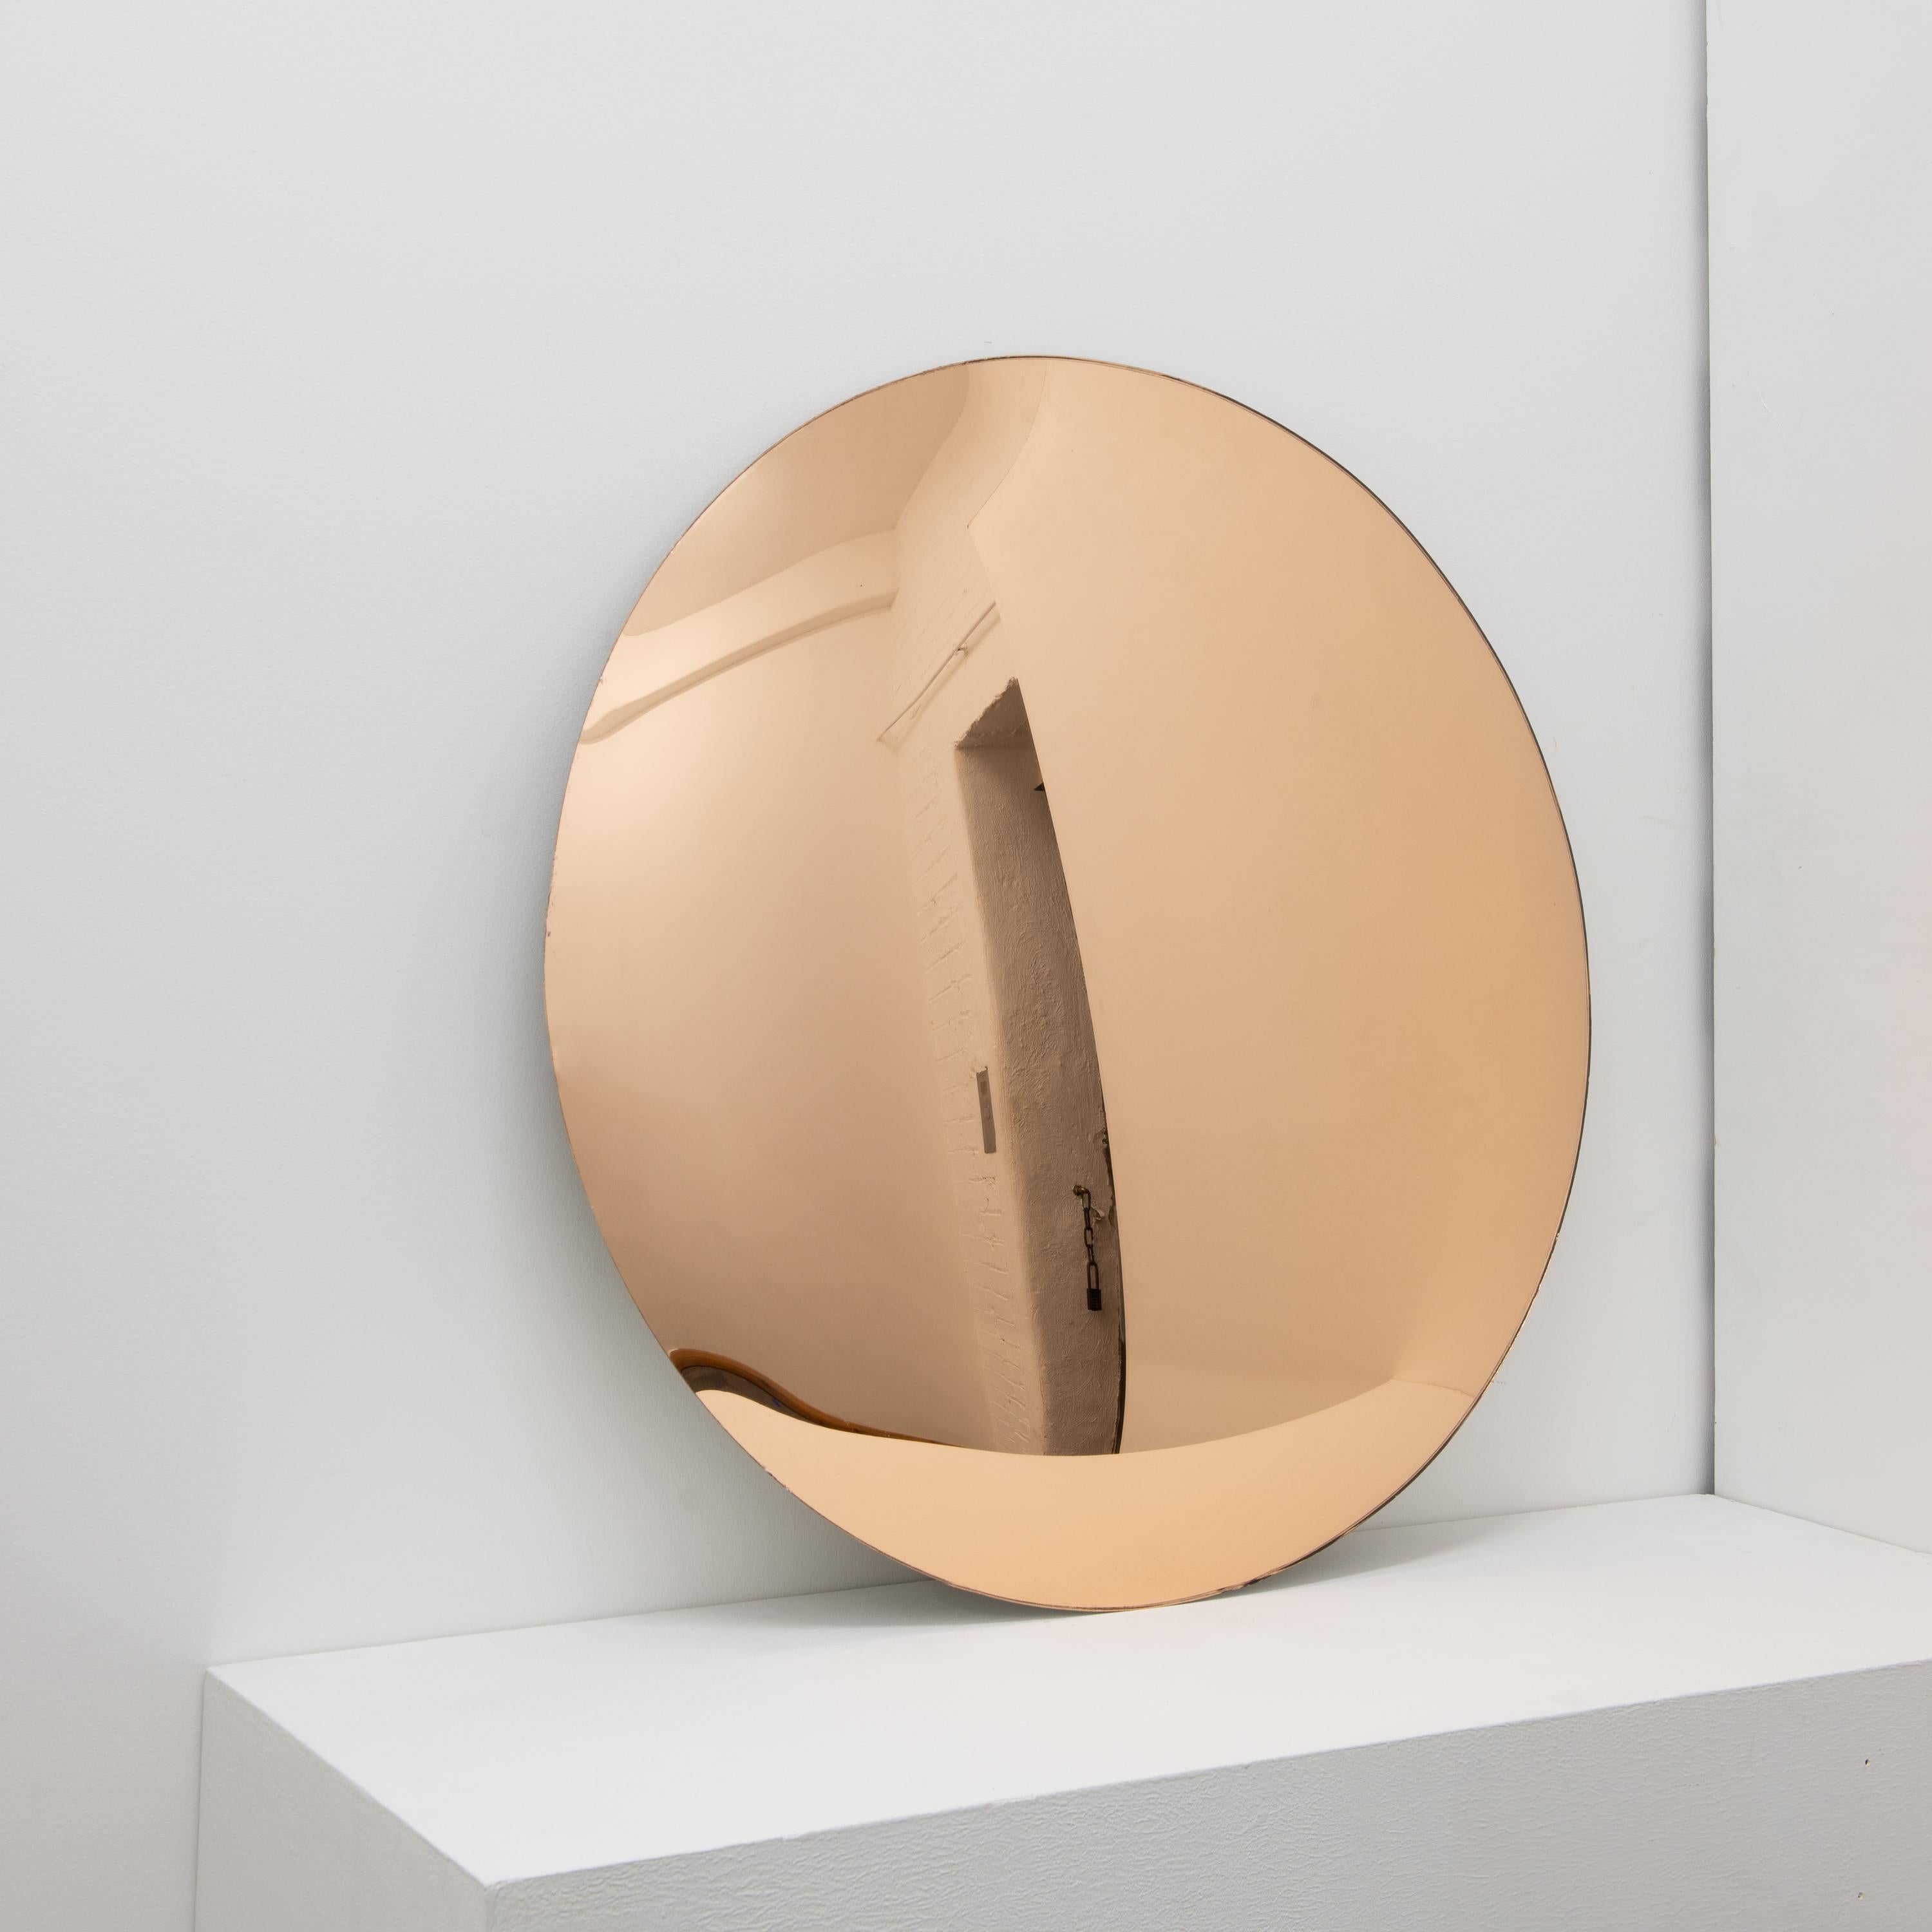 Orbis Convex Rose Gold Handcrafted Frameless Round Mirror, Large In New Condition For Sale In London, GB